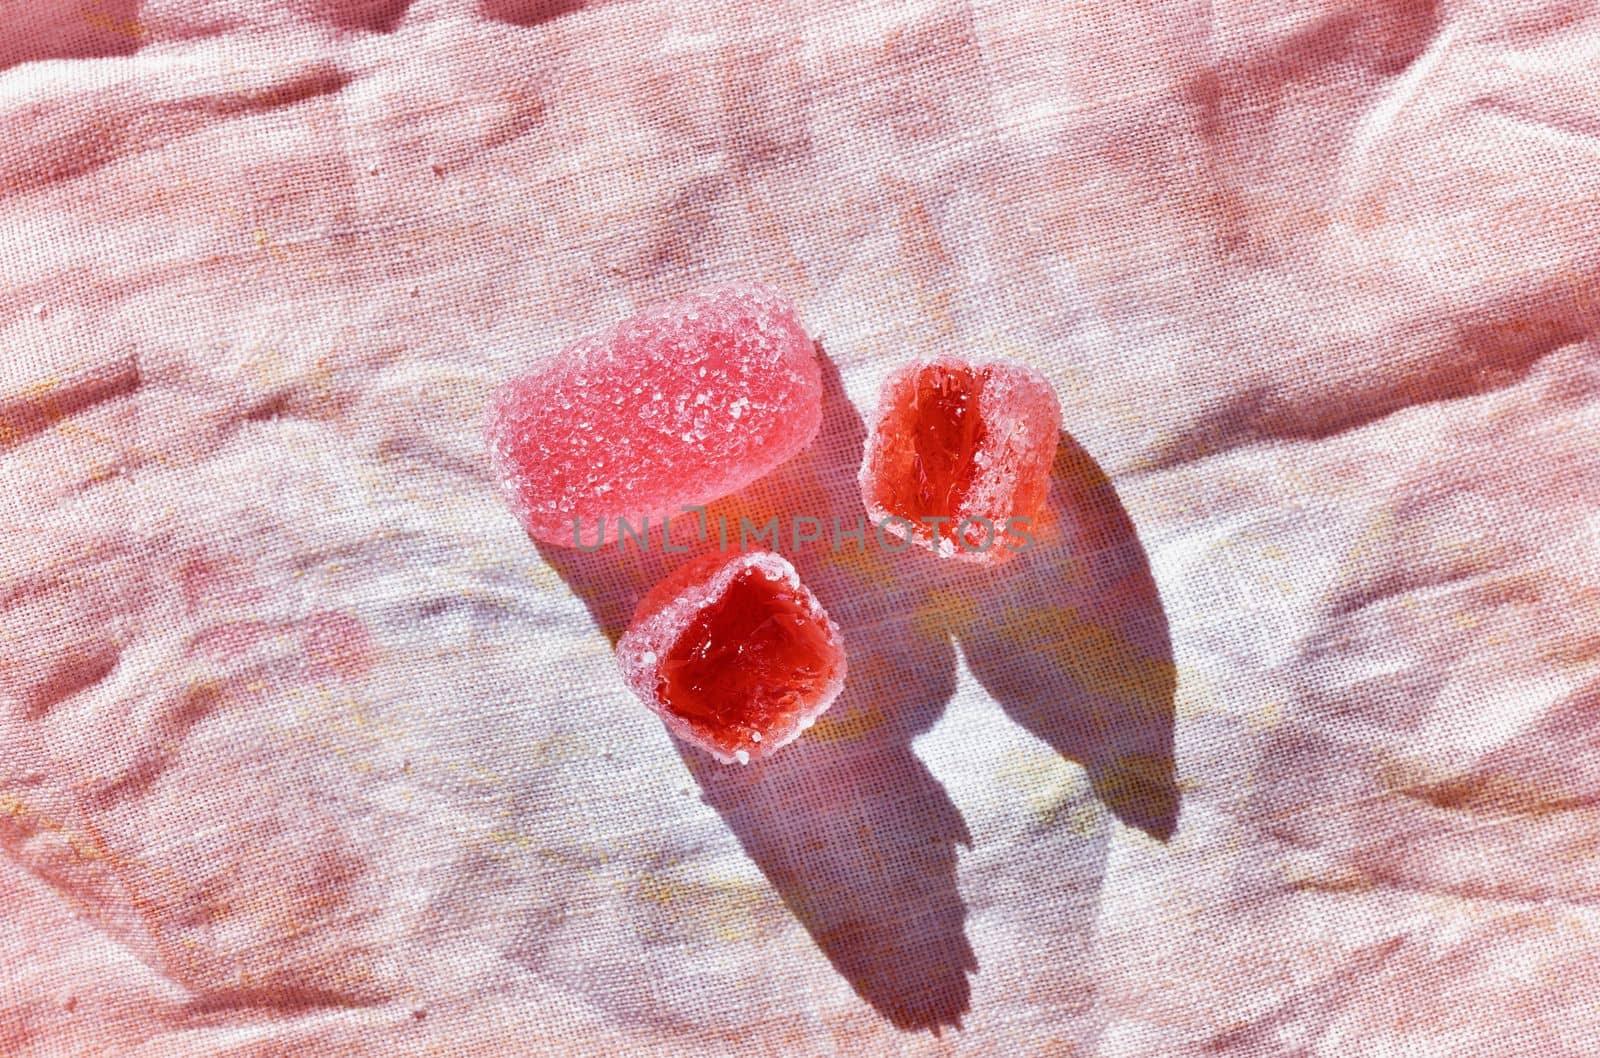 Red  sugar fruit candies on colored background  ,ready to eat unhealthy sweets